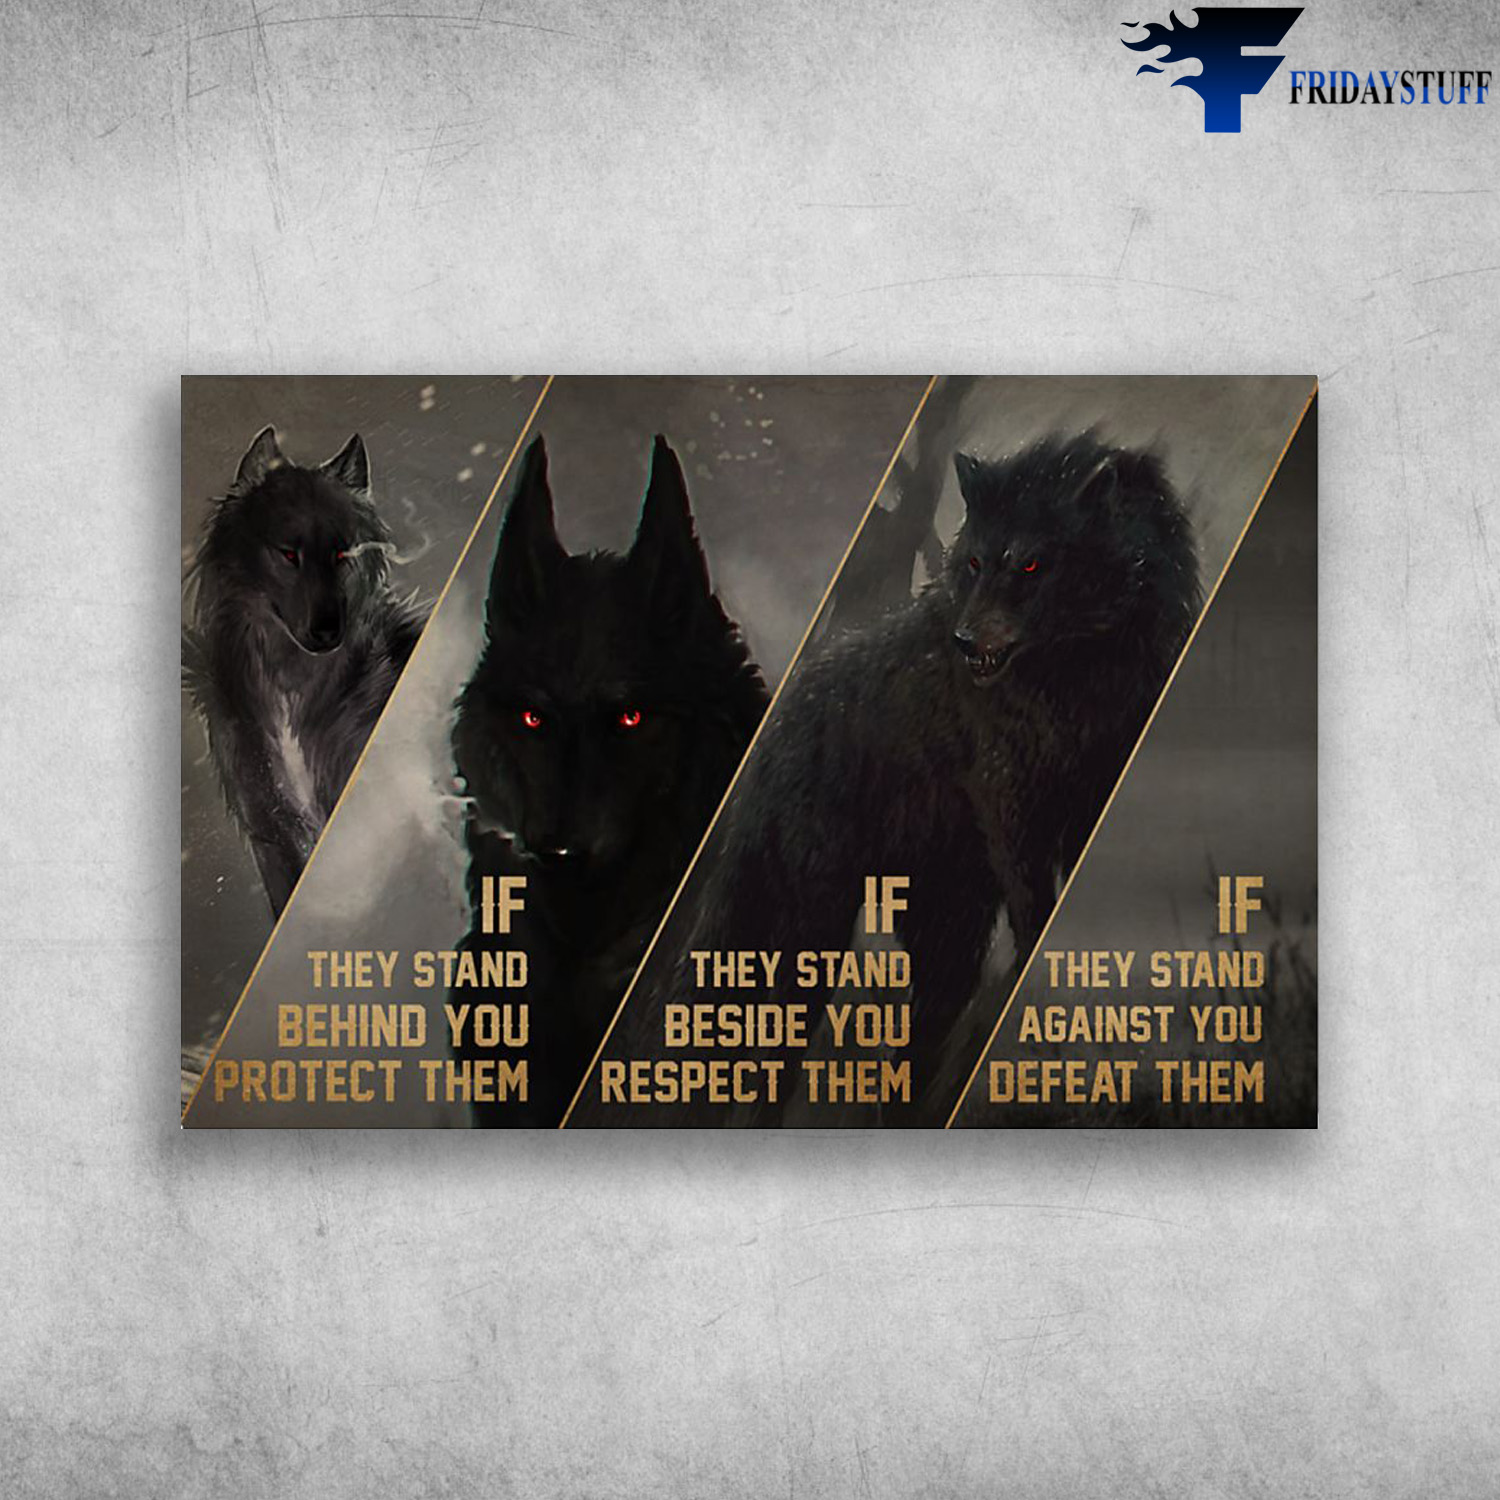 The Wolf - If They Stand Behind You Protect Them, If They Stand Beside You Respect Them, If They Stand Against You Defeat Them